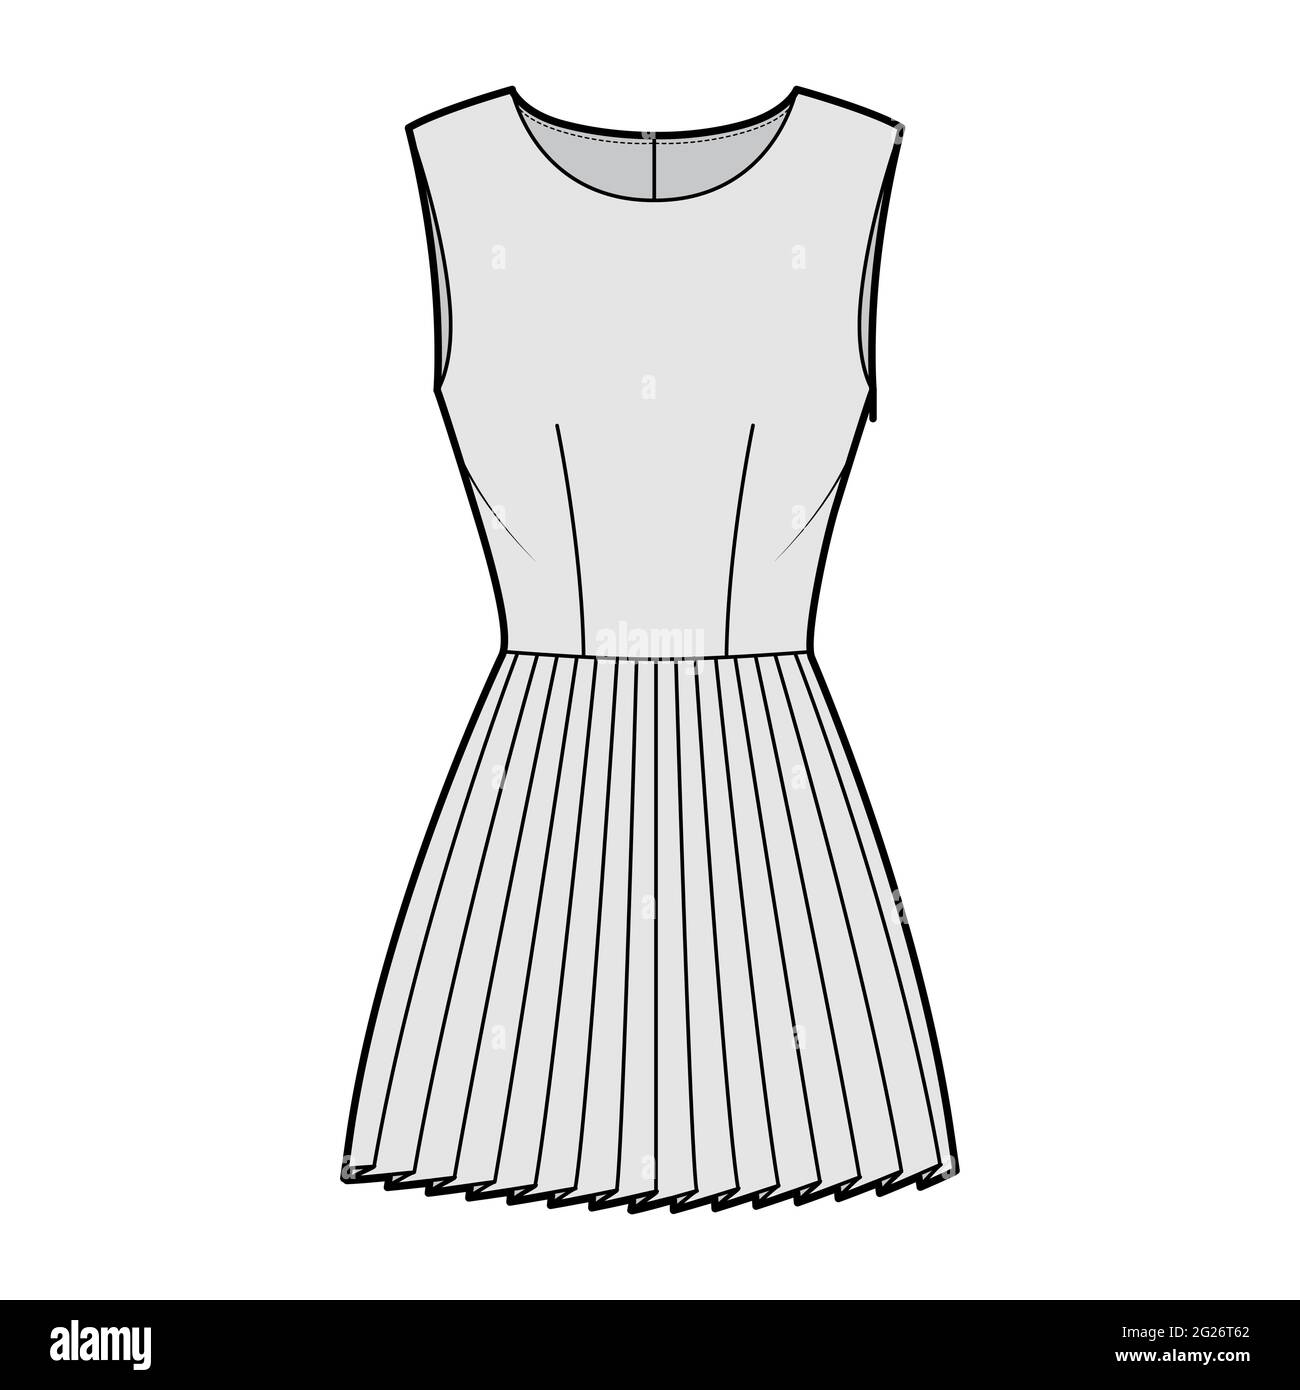 Dress pleated technical fashion illustration with sleeveless, fitted ...